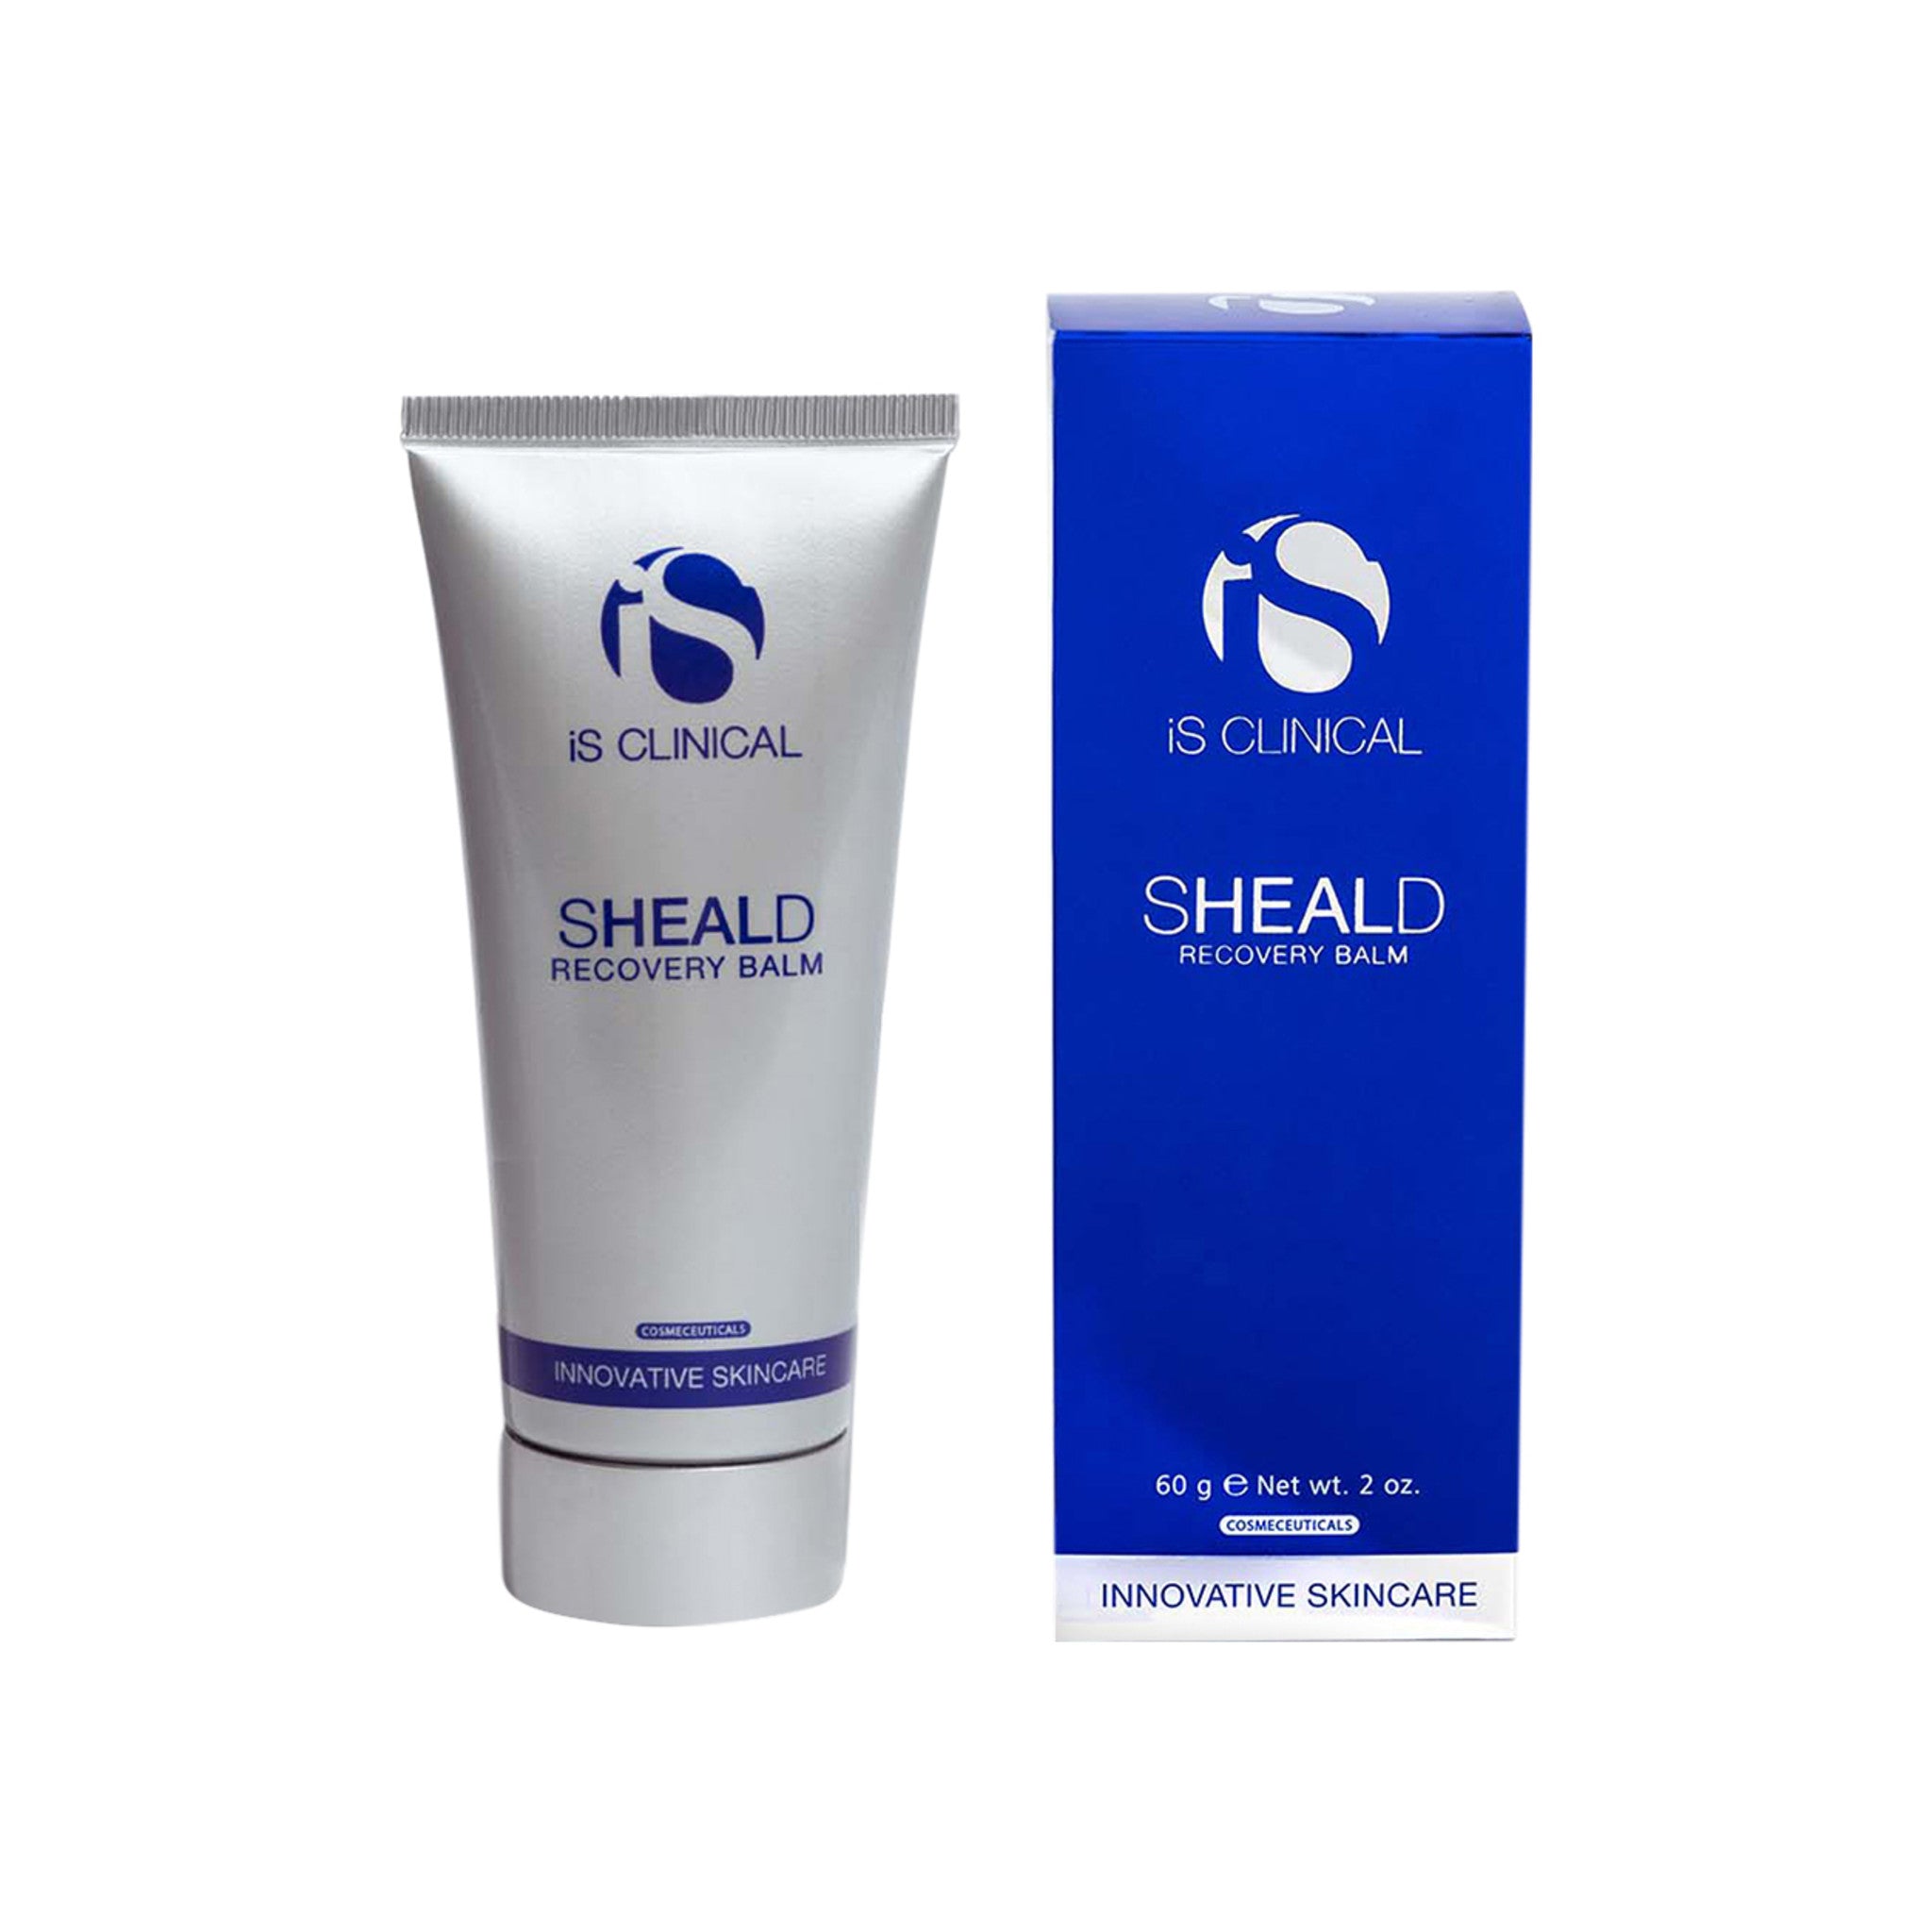 IS Clinical Sheald Recovery Balm main image.